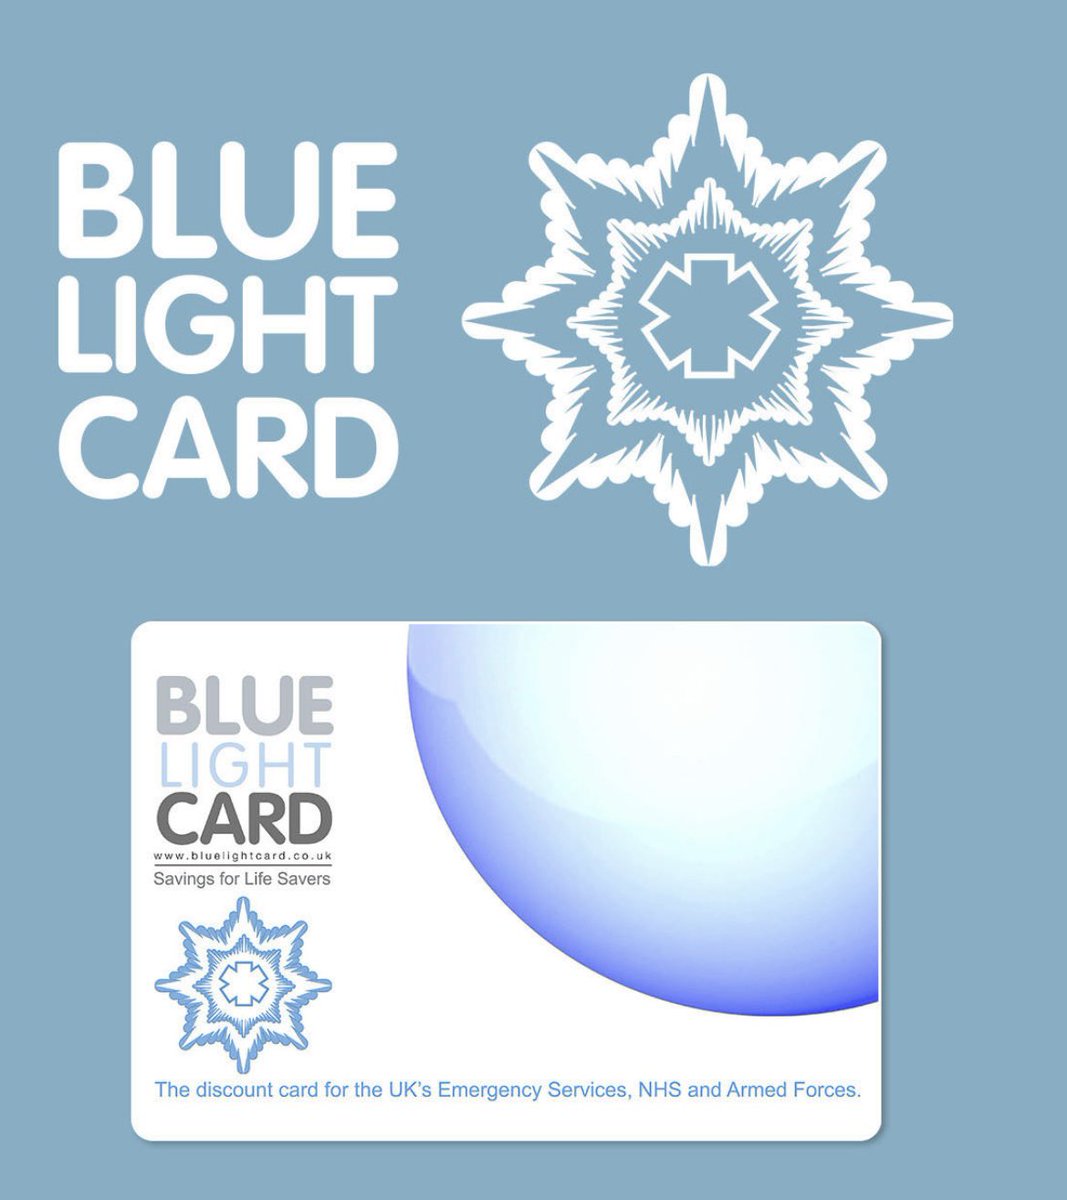 All @bluelightcard holders receive 10% off when shopping in store, just show your card at the checkout, no minimum spend 🙌🏼 #seasiderseafoods #seafood #frozenseafood #bluelightcard #nhs #police #doctors #nurses #carers #fireservice #armedforces #emergencyservices #thankyou